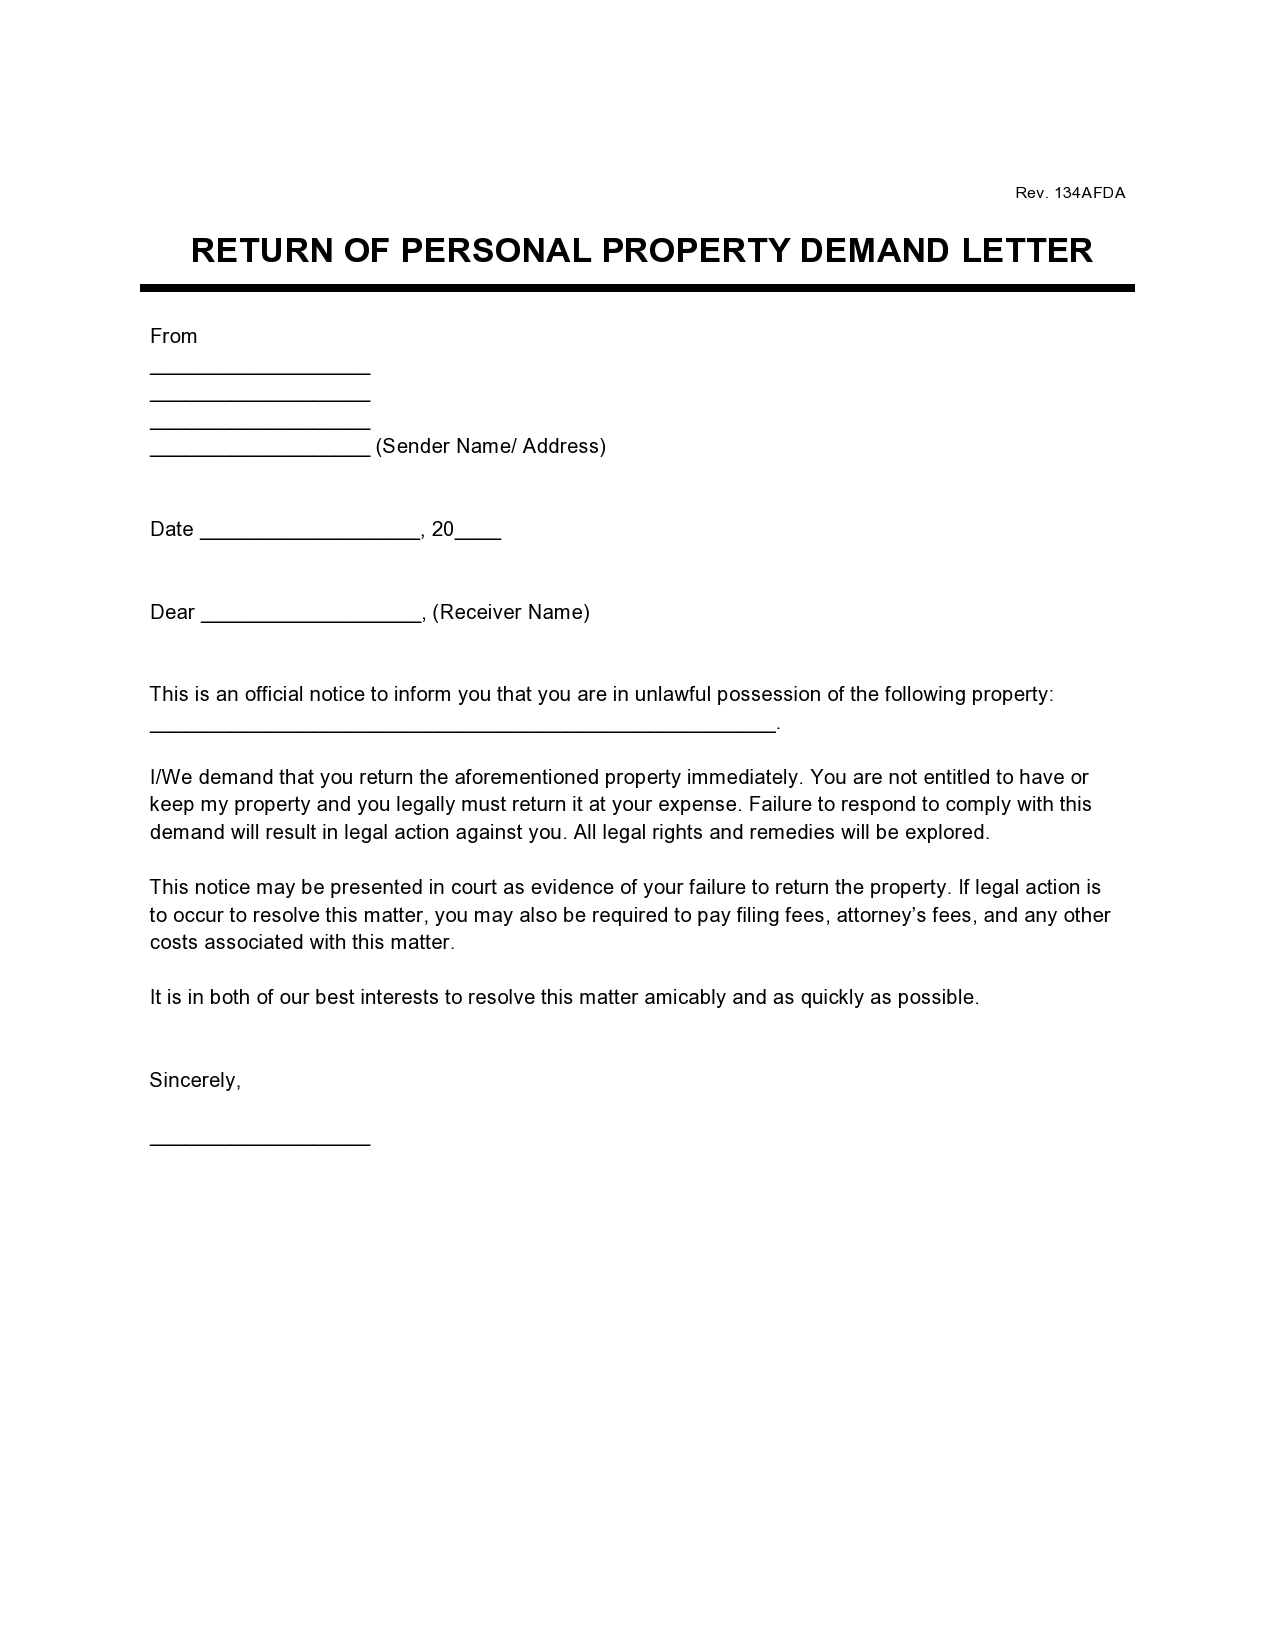 personal property demand letter